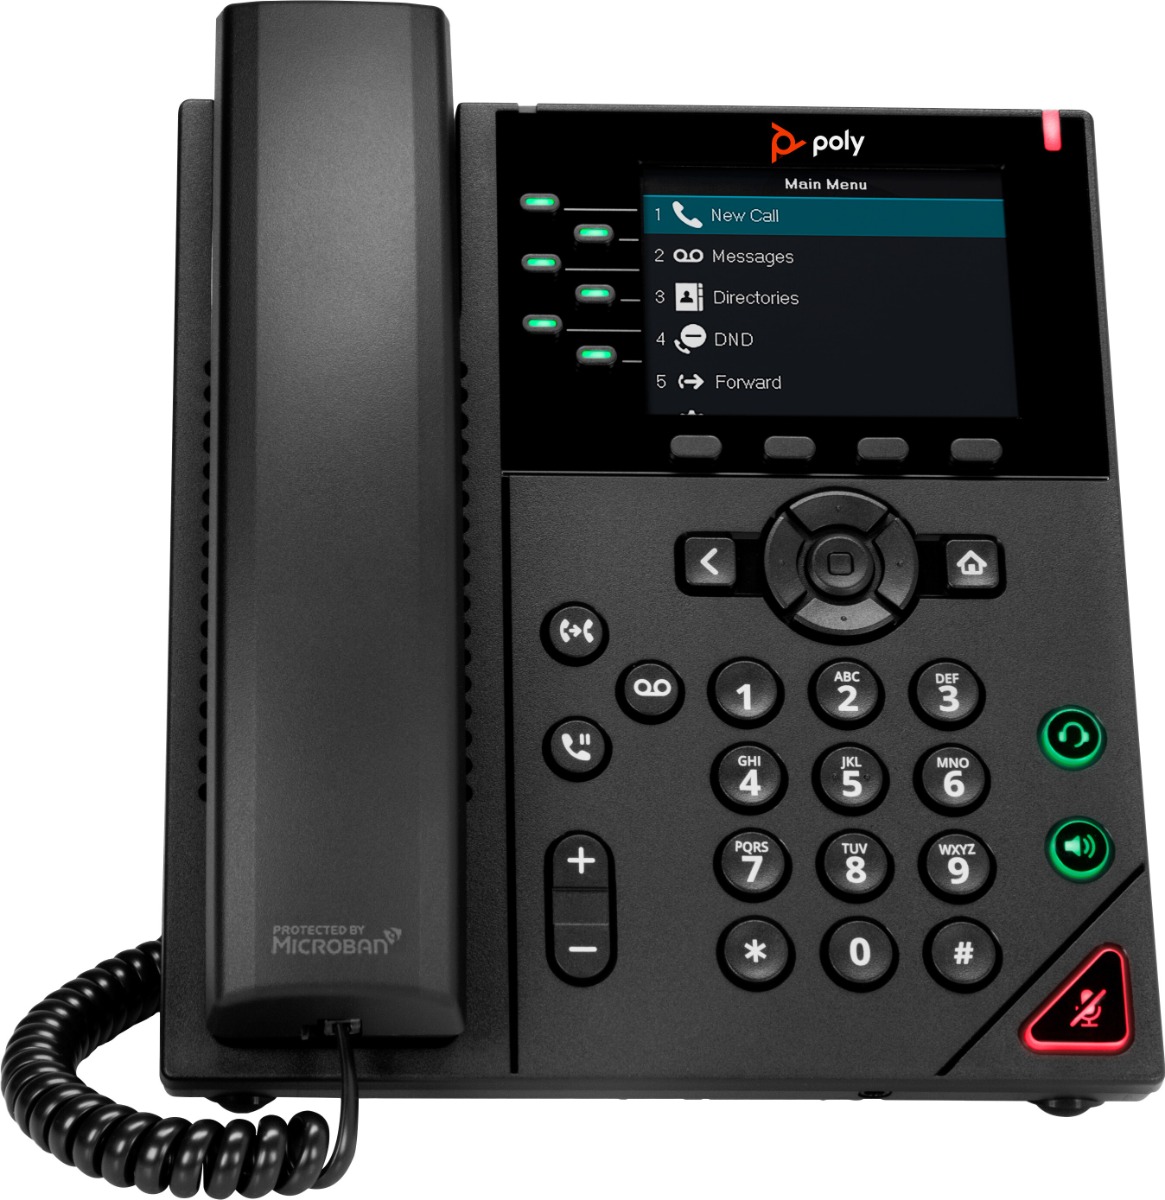 Which keys are used during a call on the Polycom VVX 350 6-Line IP Phone?